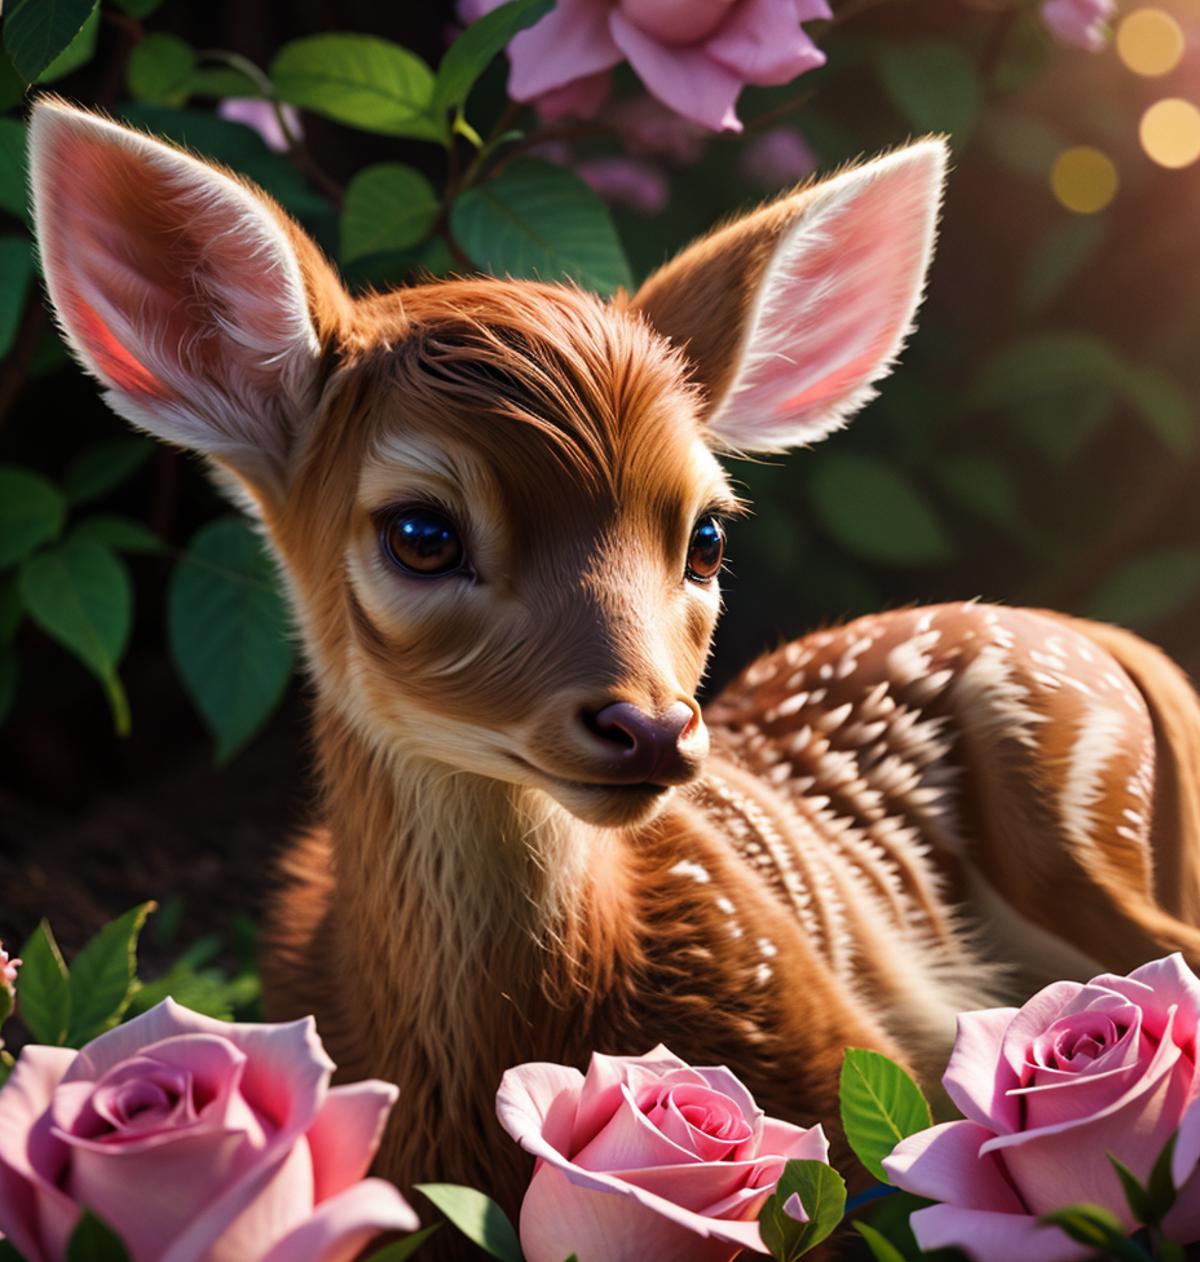 Deer with blue eyes sitting among pink roses in a garden.